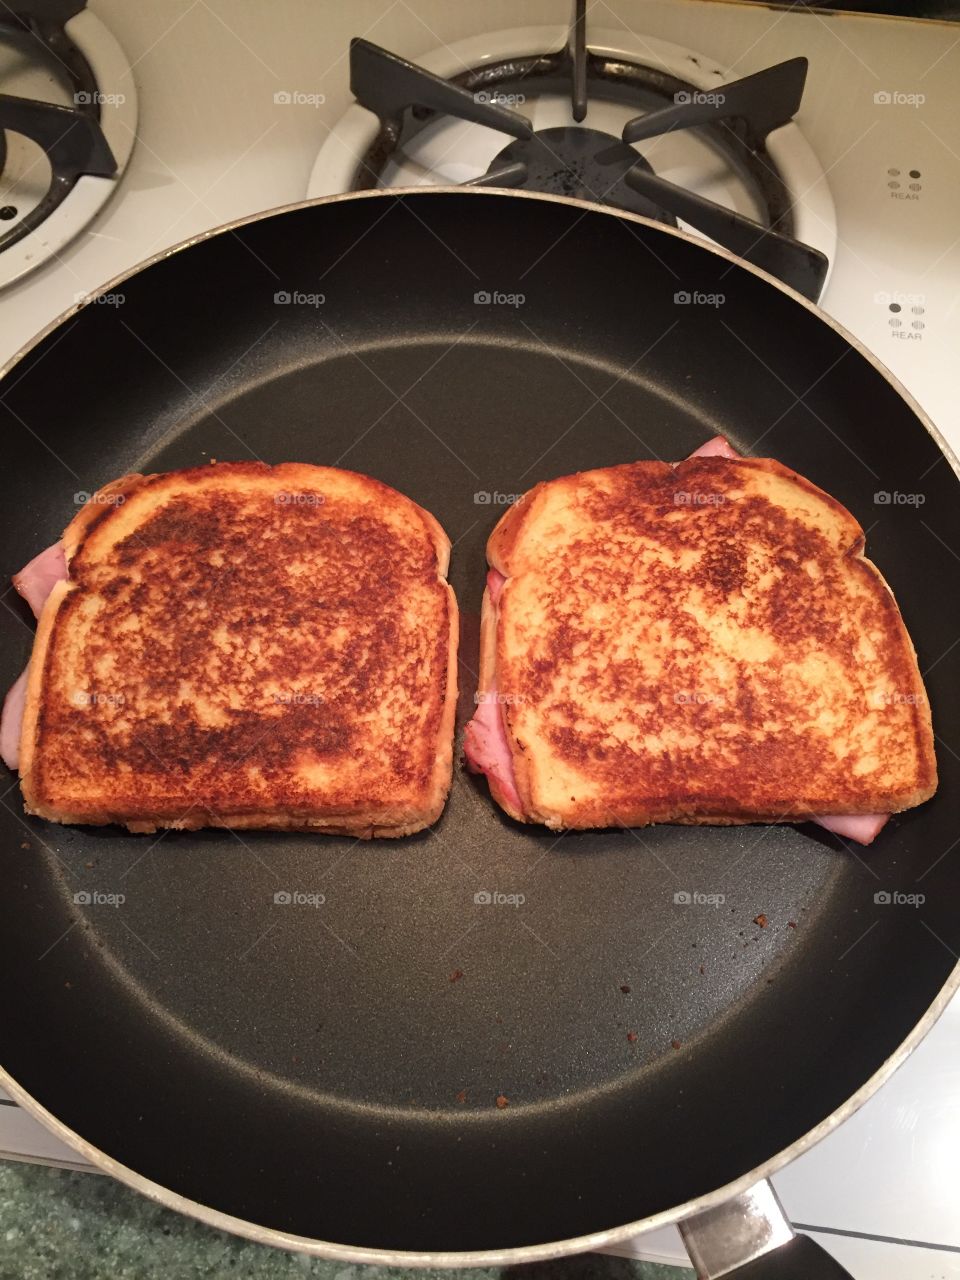 Grilled Cheese!